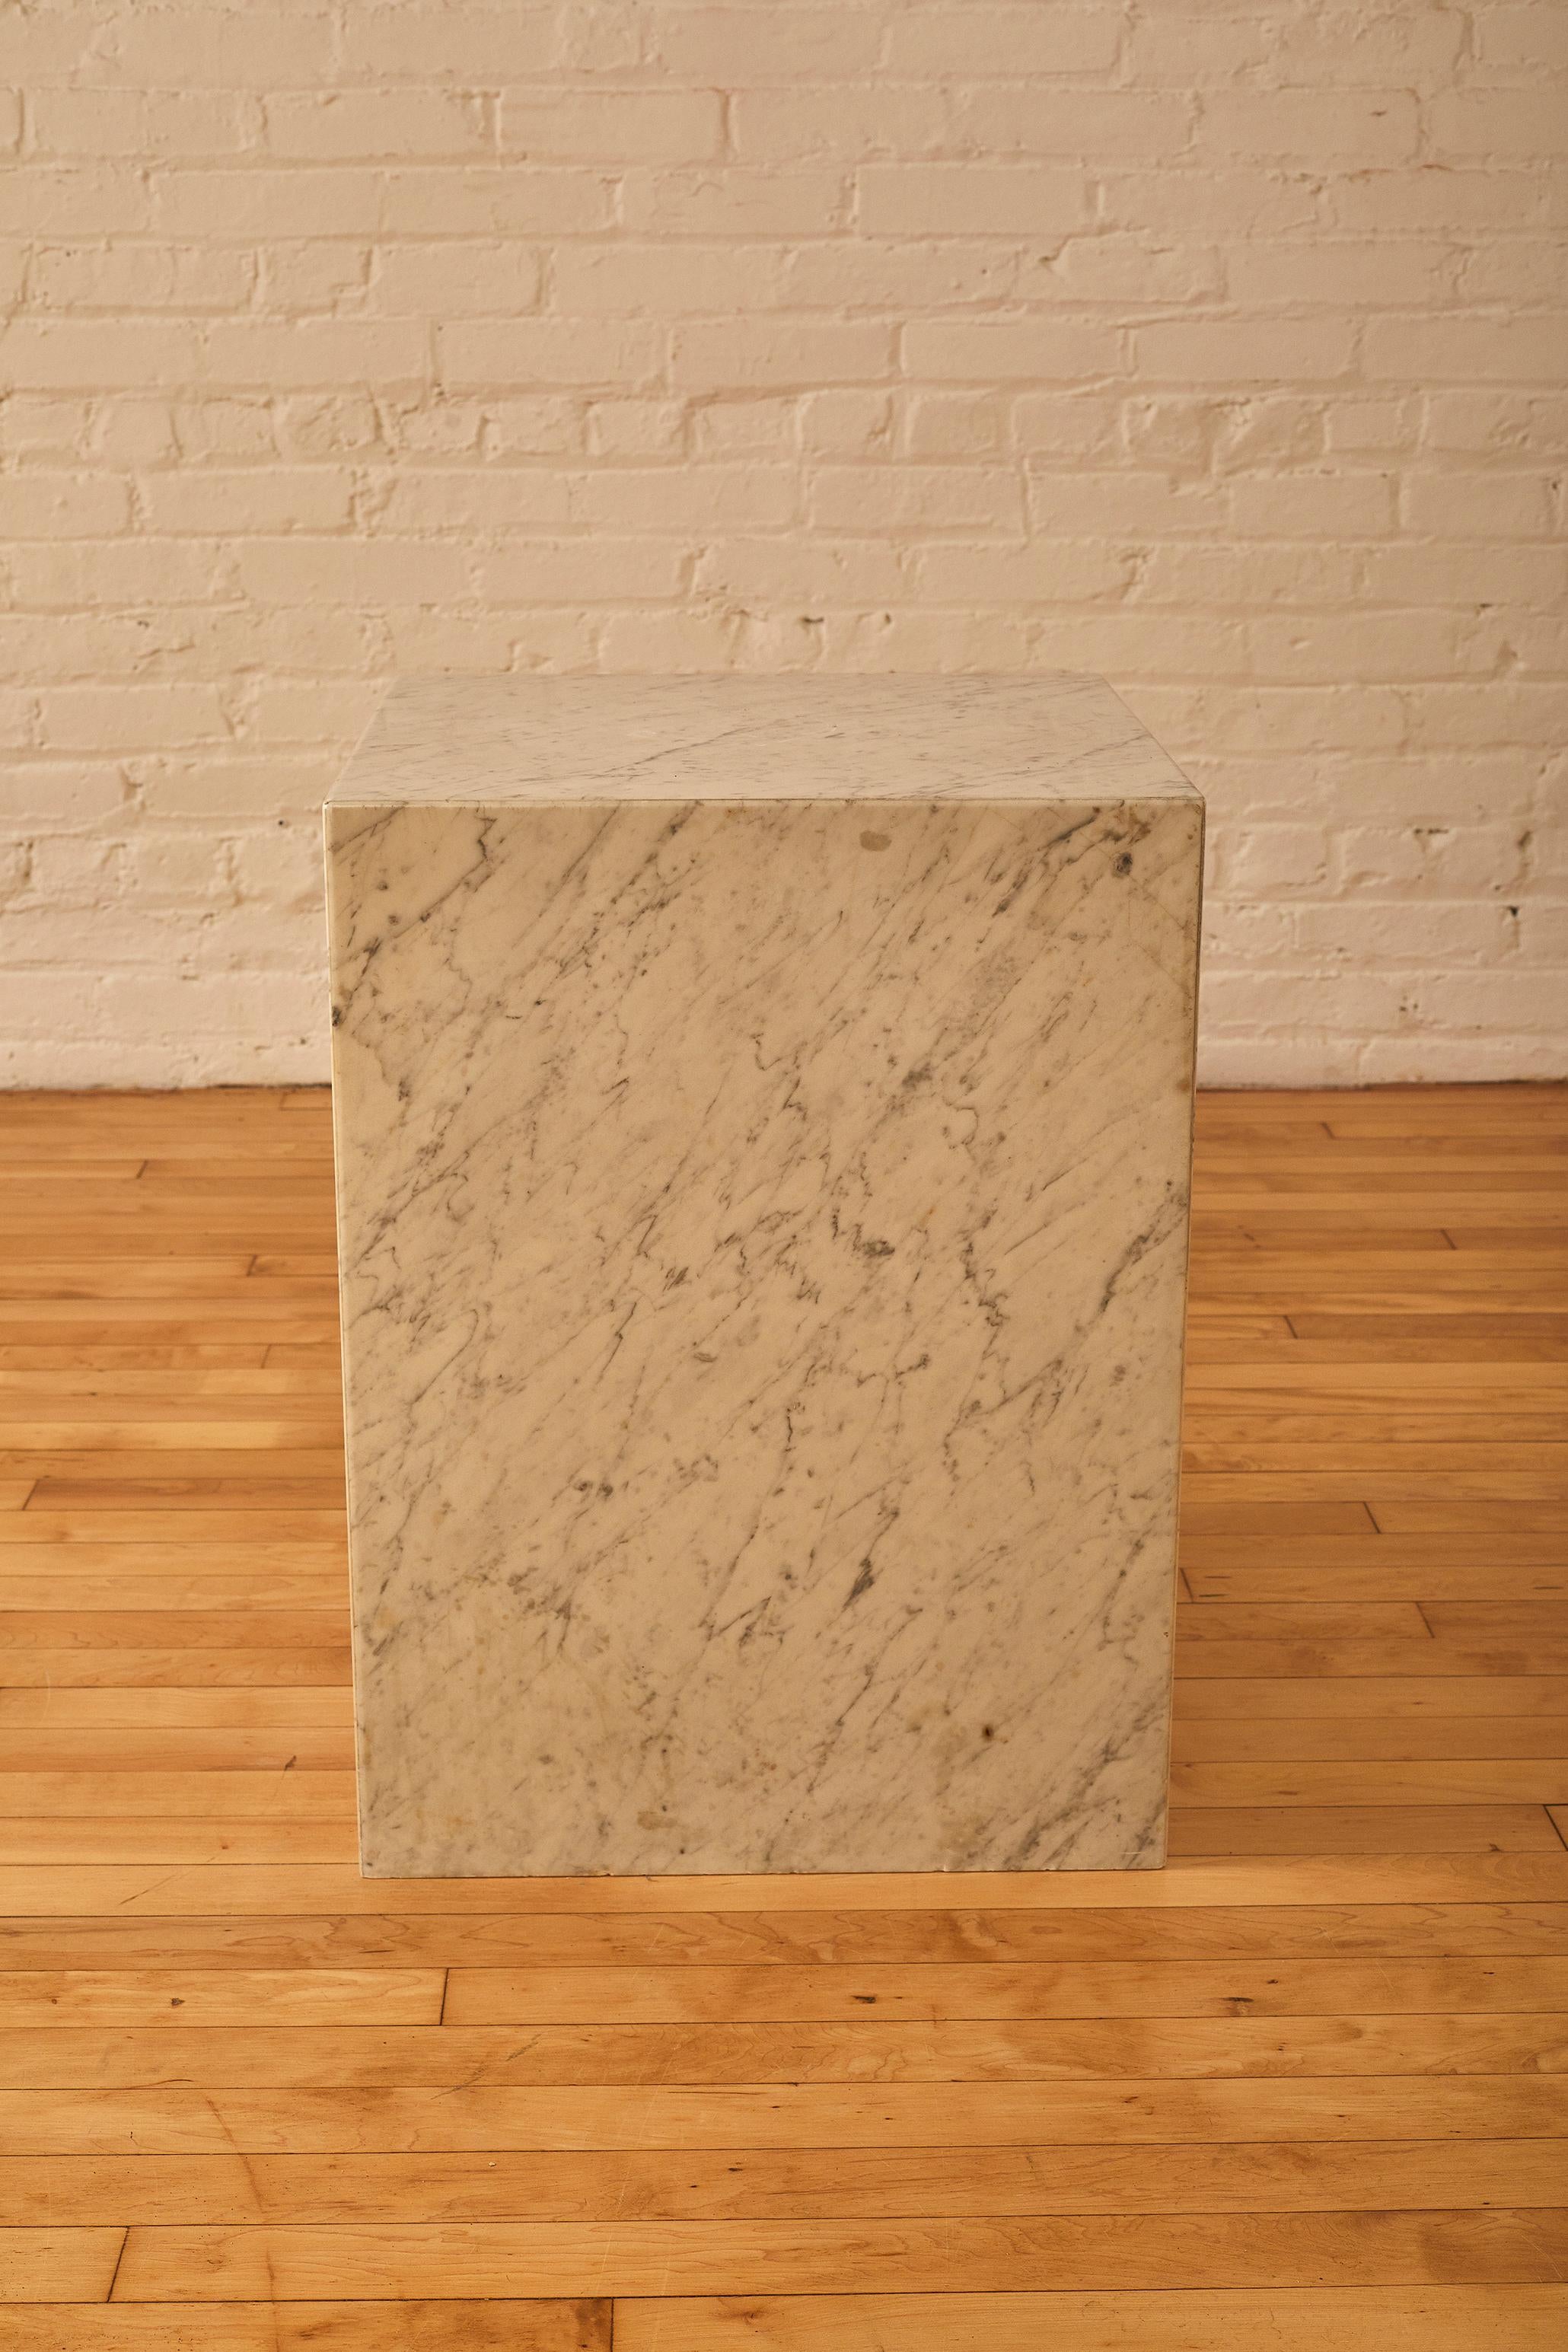 Square Pedestal/side table in Carrara marble. Carrara Marble comes from, Carrara, city, Tuscany, north-central Italy. The city is famous for some of the world’s finest marble, called Carrara, used by sculptors from Michelangelo to Henry Moore.

